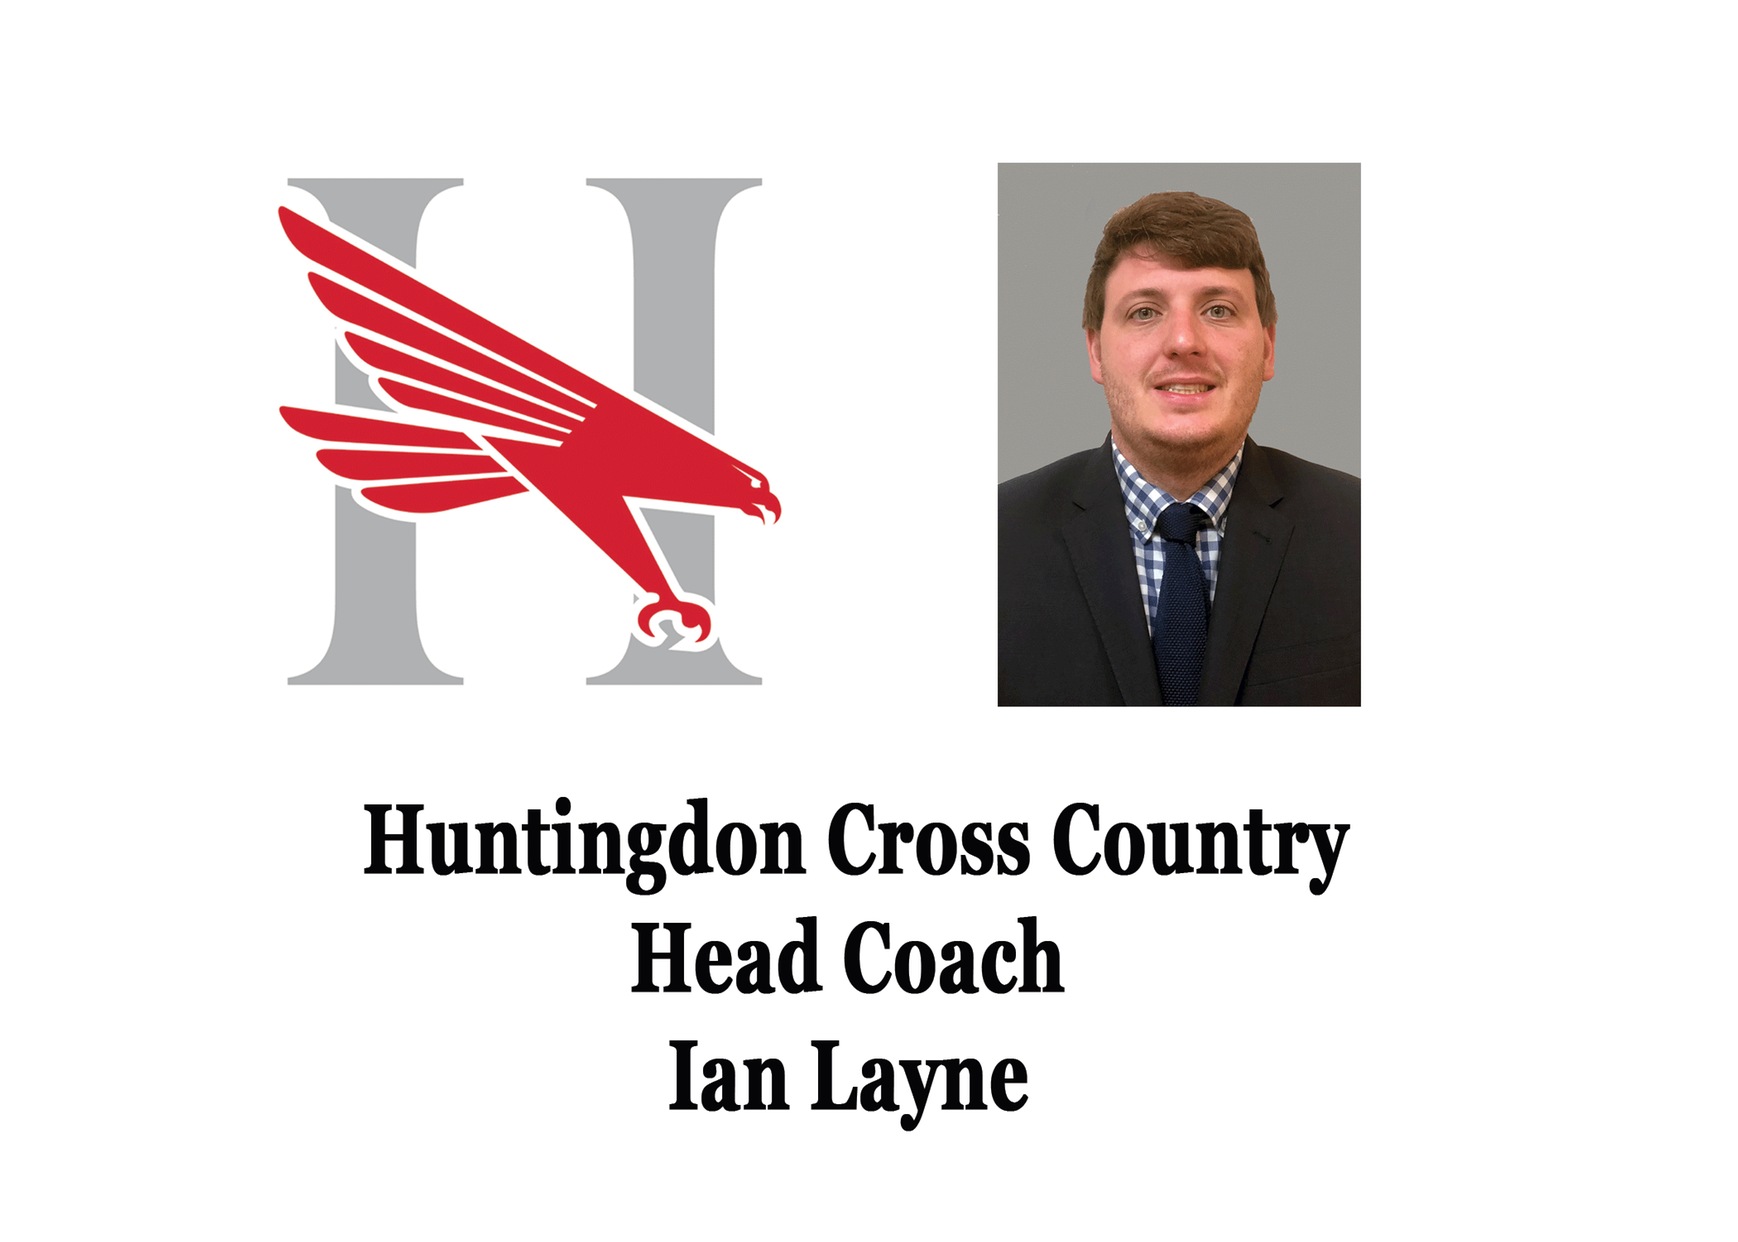 Layne returns to alma mater to lead cross country program